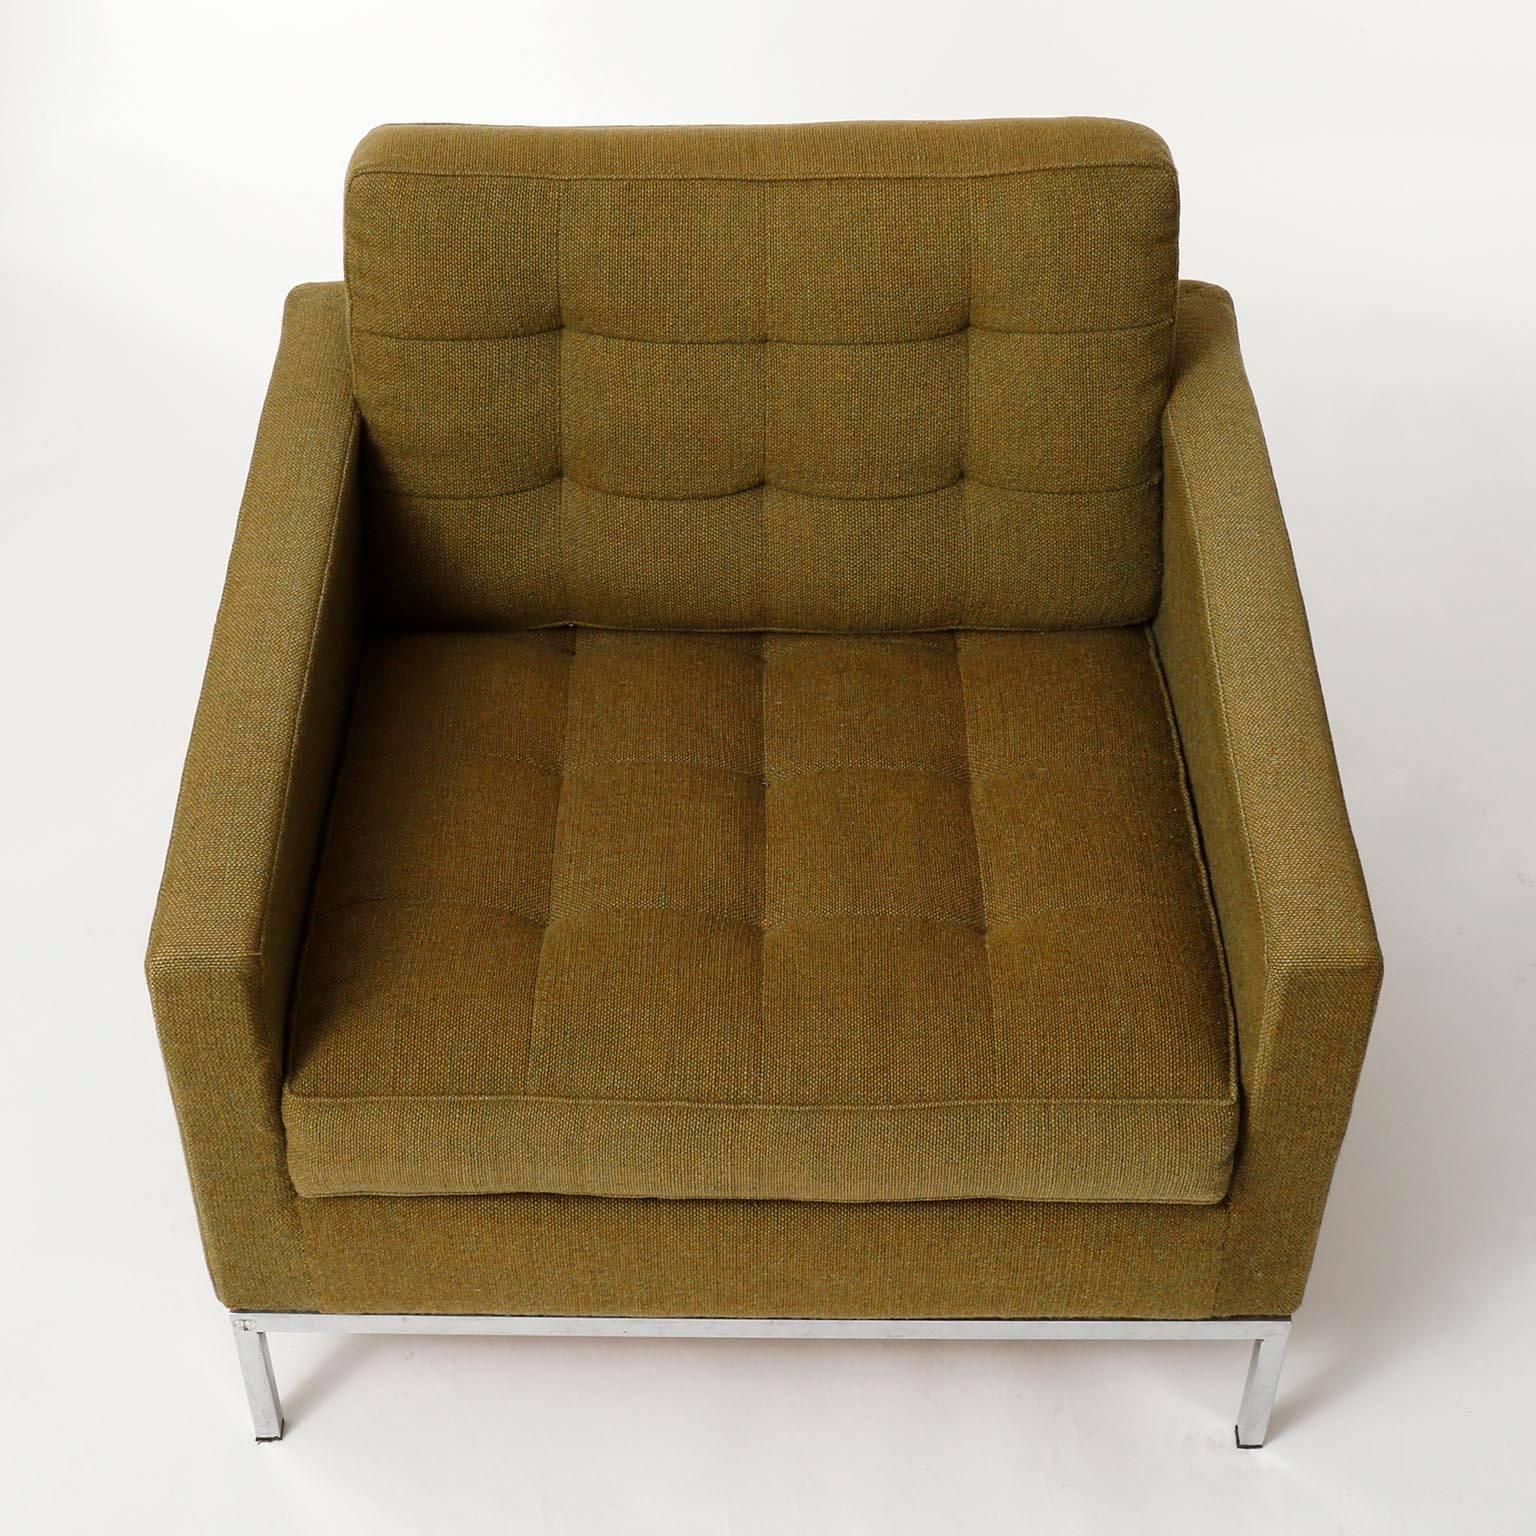 Late 20th Century Pair of Green Florence Knoll Lounge Chairs Armchairs, Knoll International, 1954